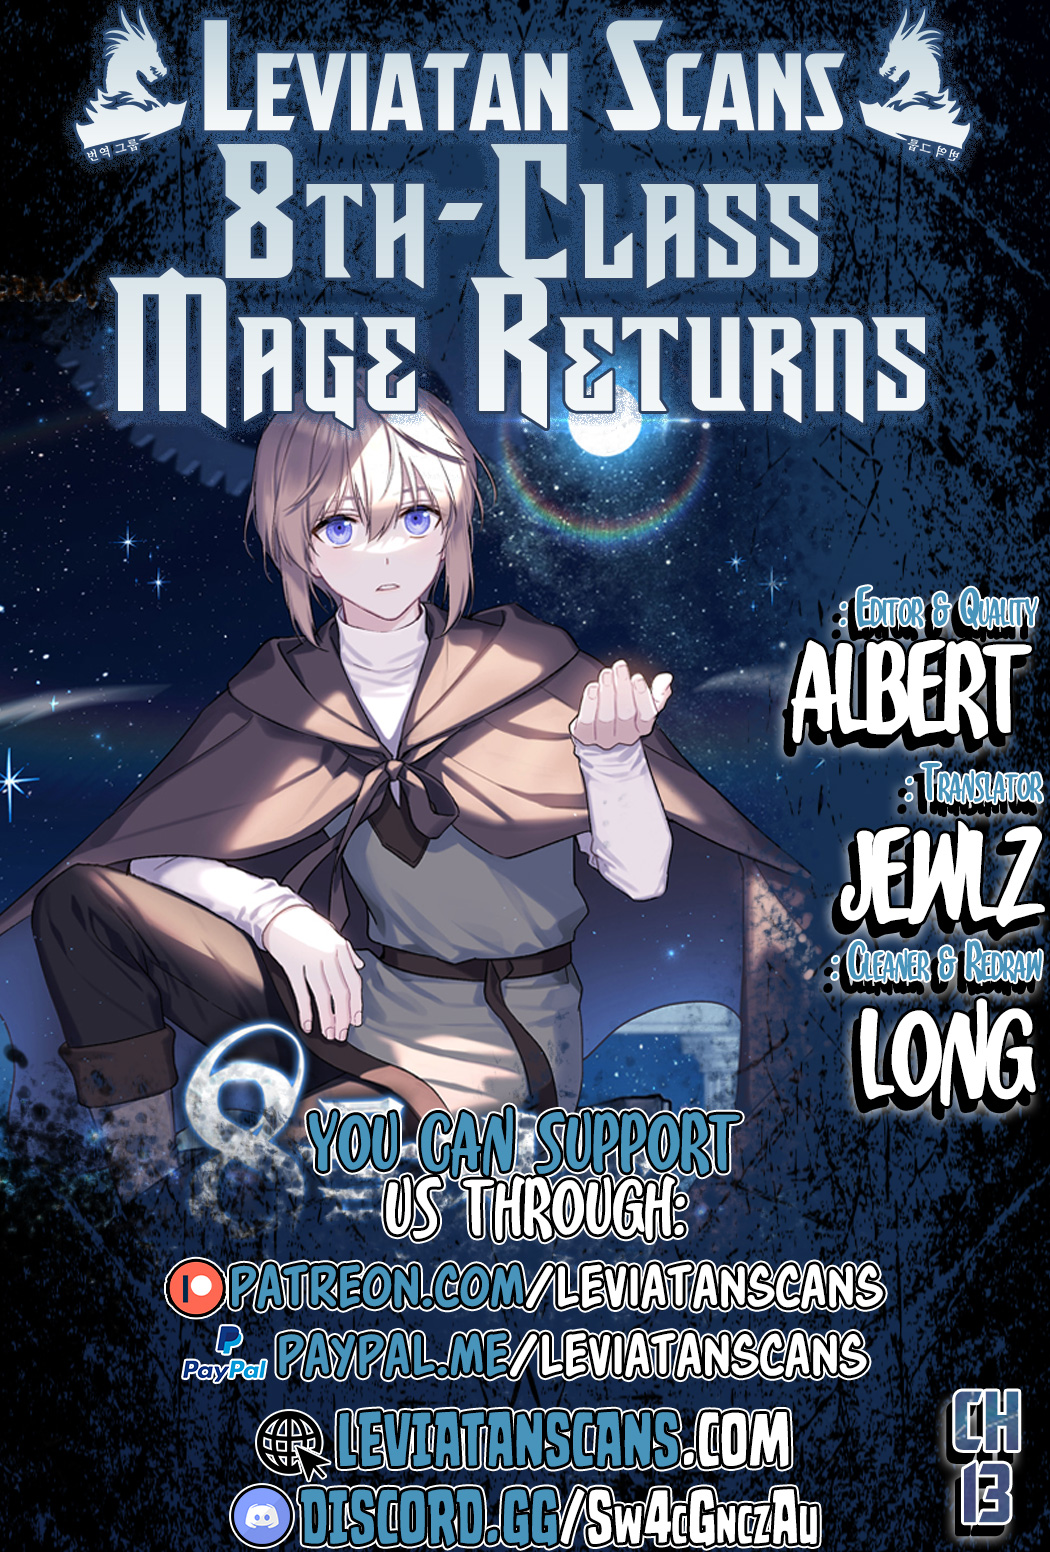 Return of the 8th Class Magician - Chapter 7132 - Image 1